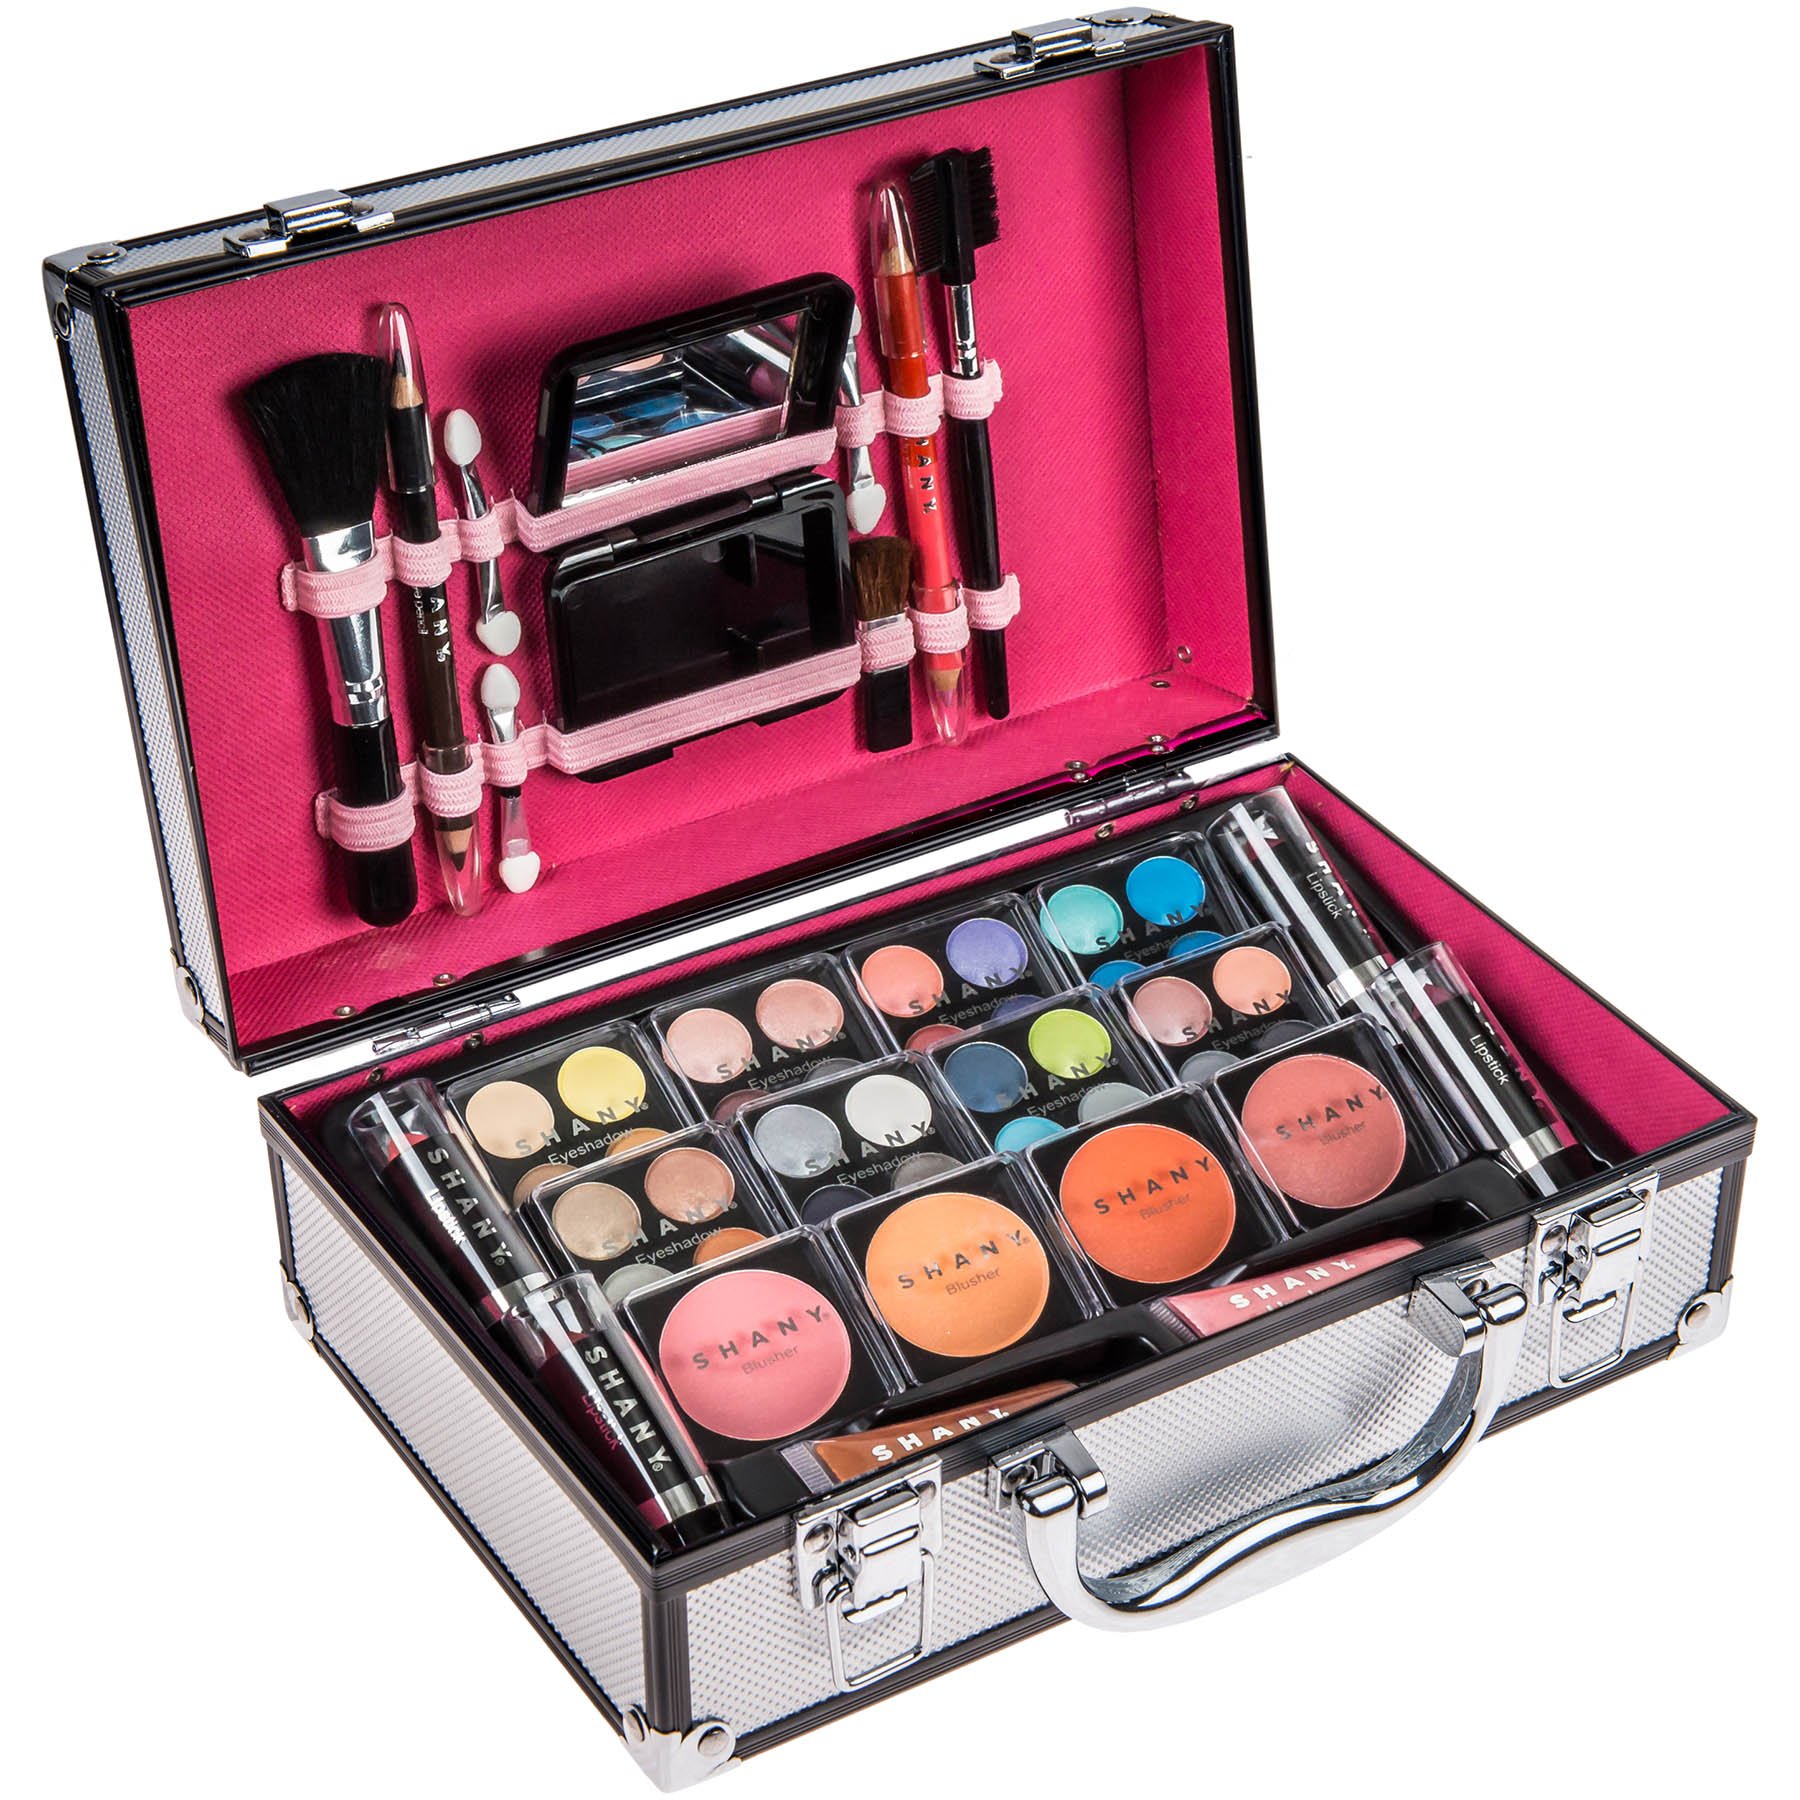 SHANY Carry All Makeup Train Case with Pro Teen Makeup Set, Makeup Brushes, Lipsticks, Eye Shadows, Blushes, and more - Silver